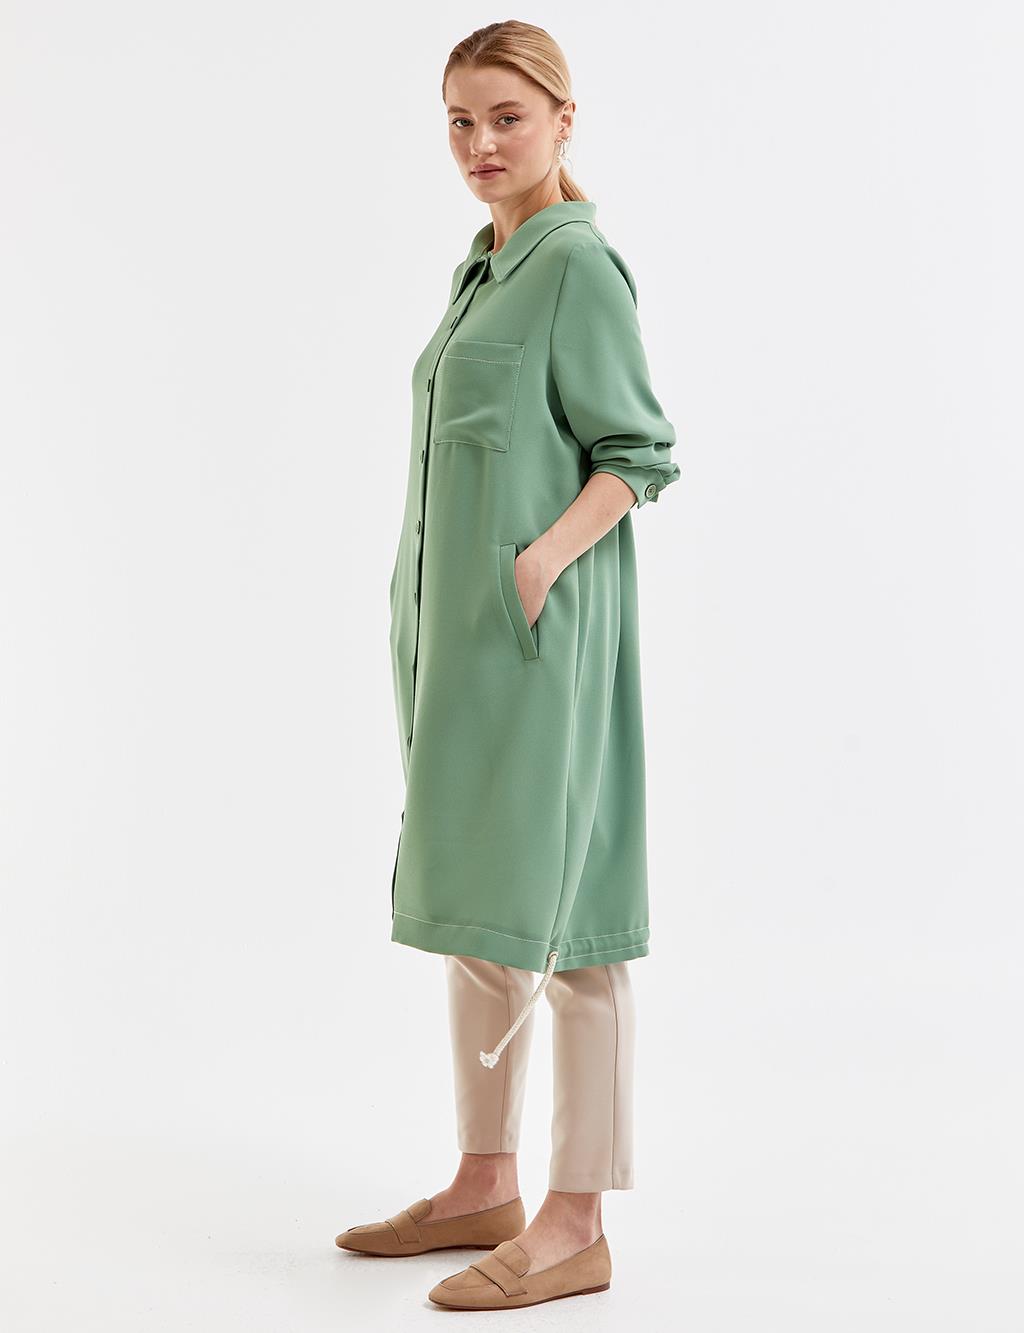 Contrast Stitched Wear & Go Green